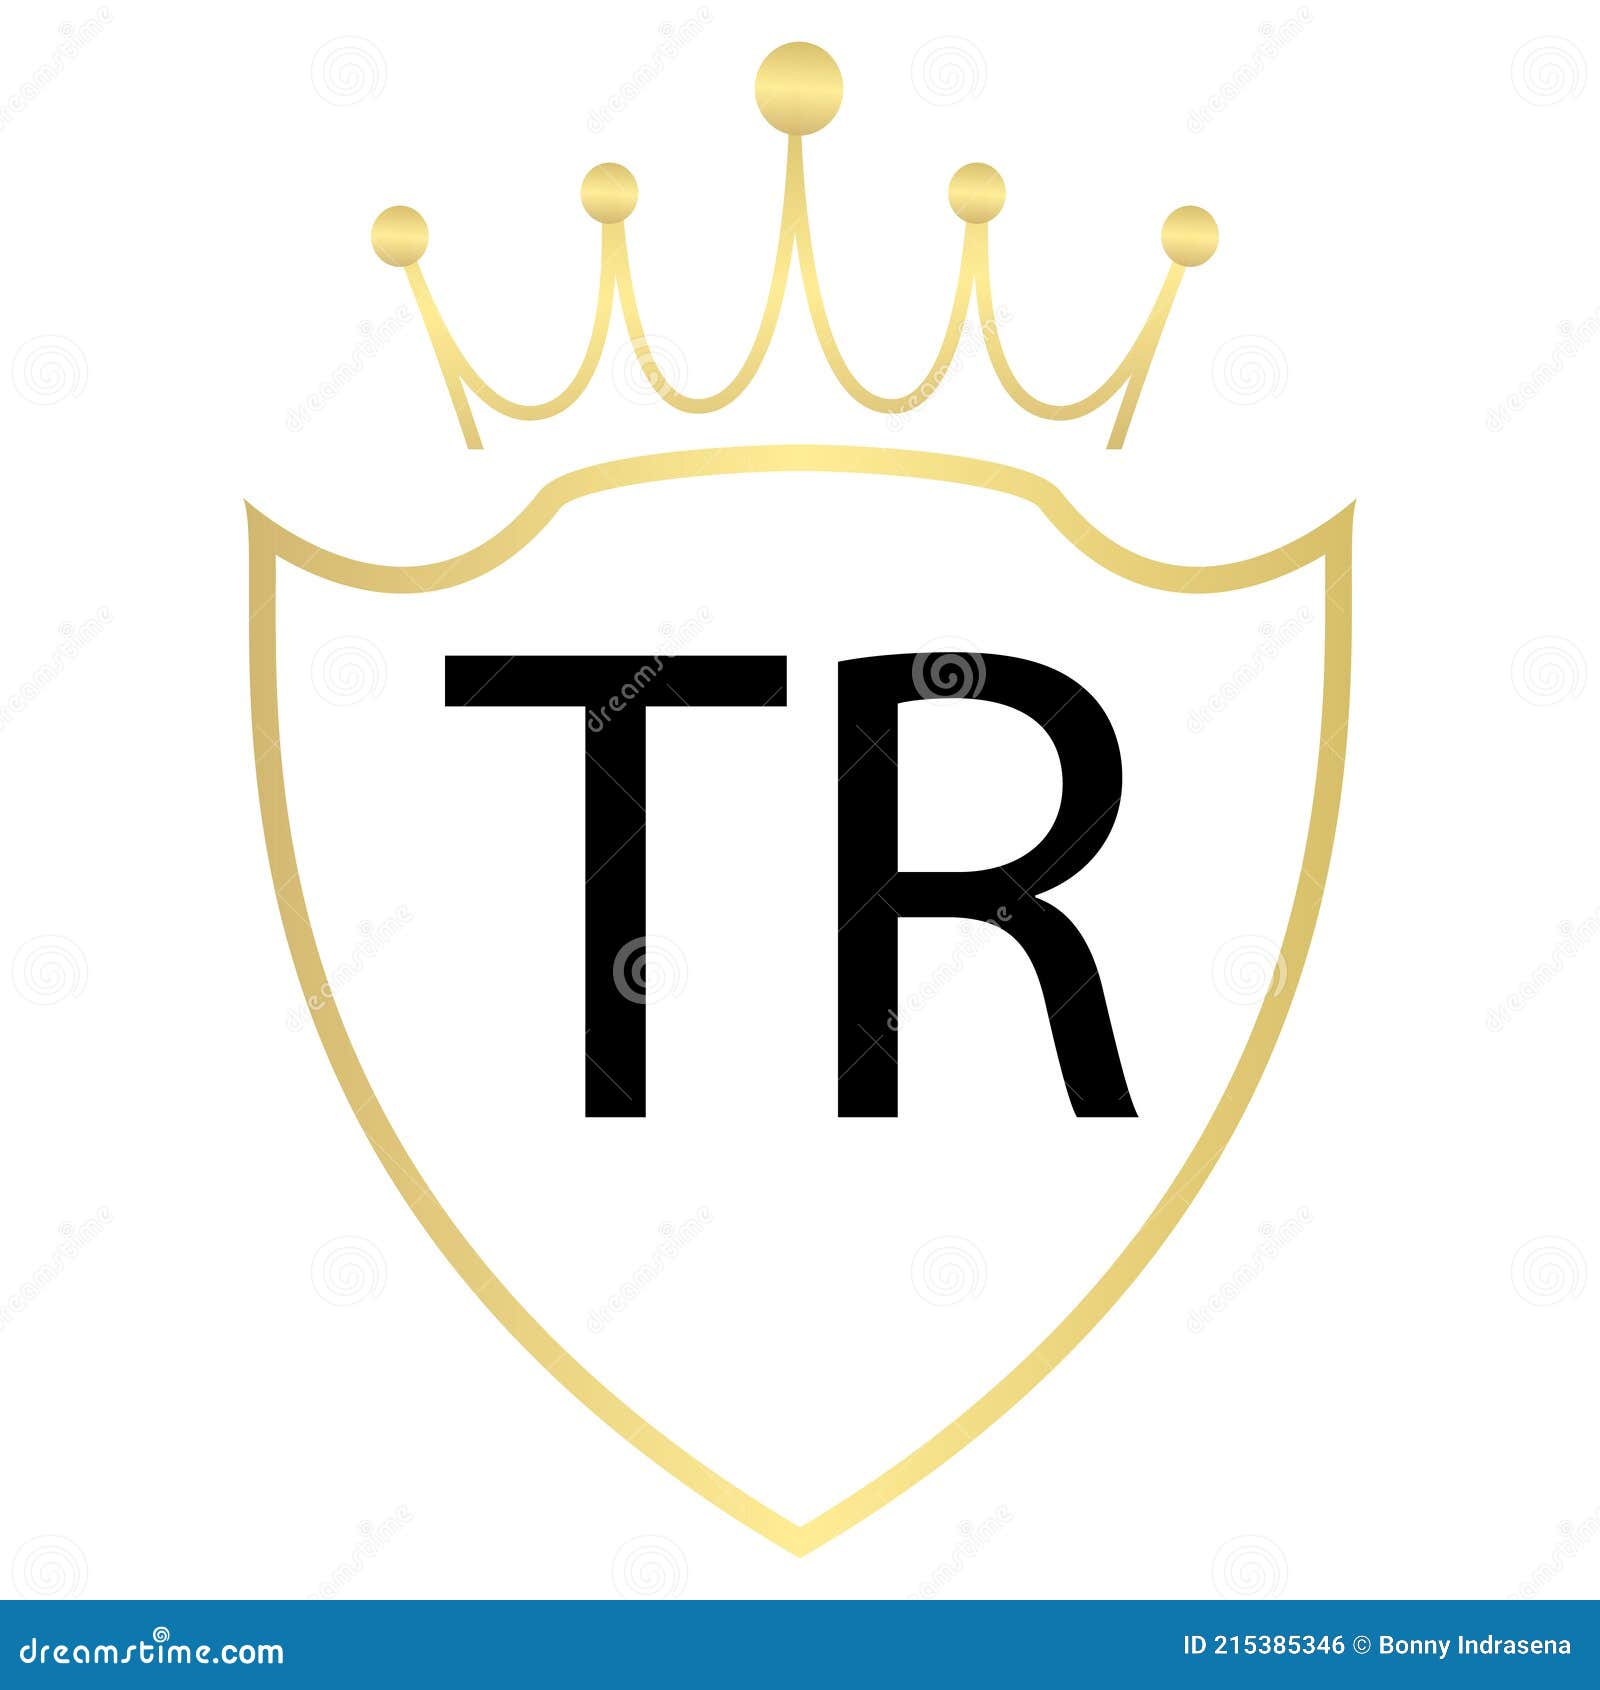 Tr Logo Stock Photos and Images - 123RF